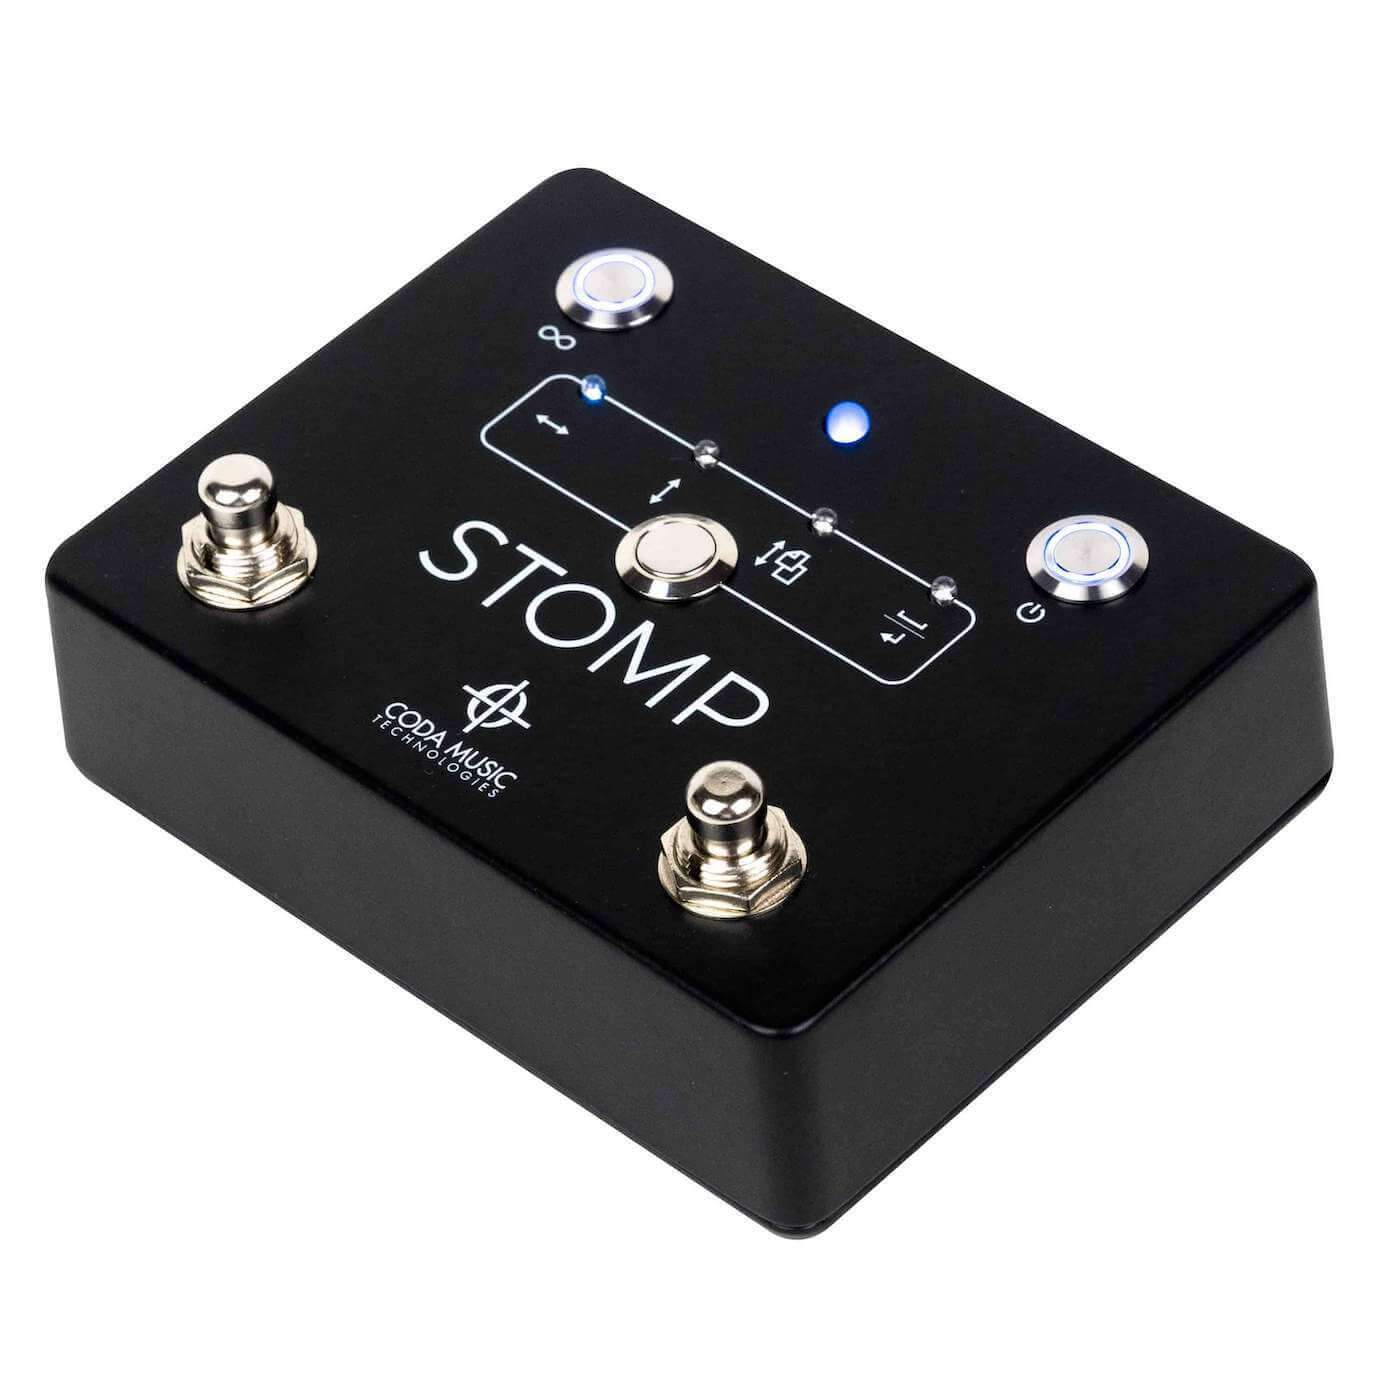 Coda Music Technologies Musical Instruments STOMP Bluetooth® 4.0 Page Turner Pedal & App Controller for Tablets